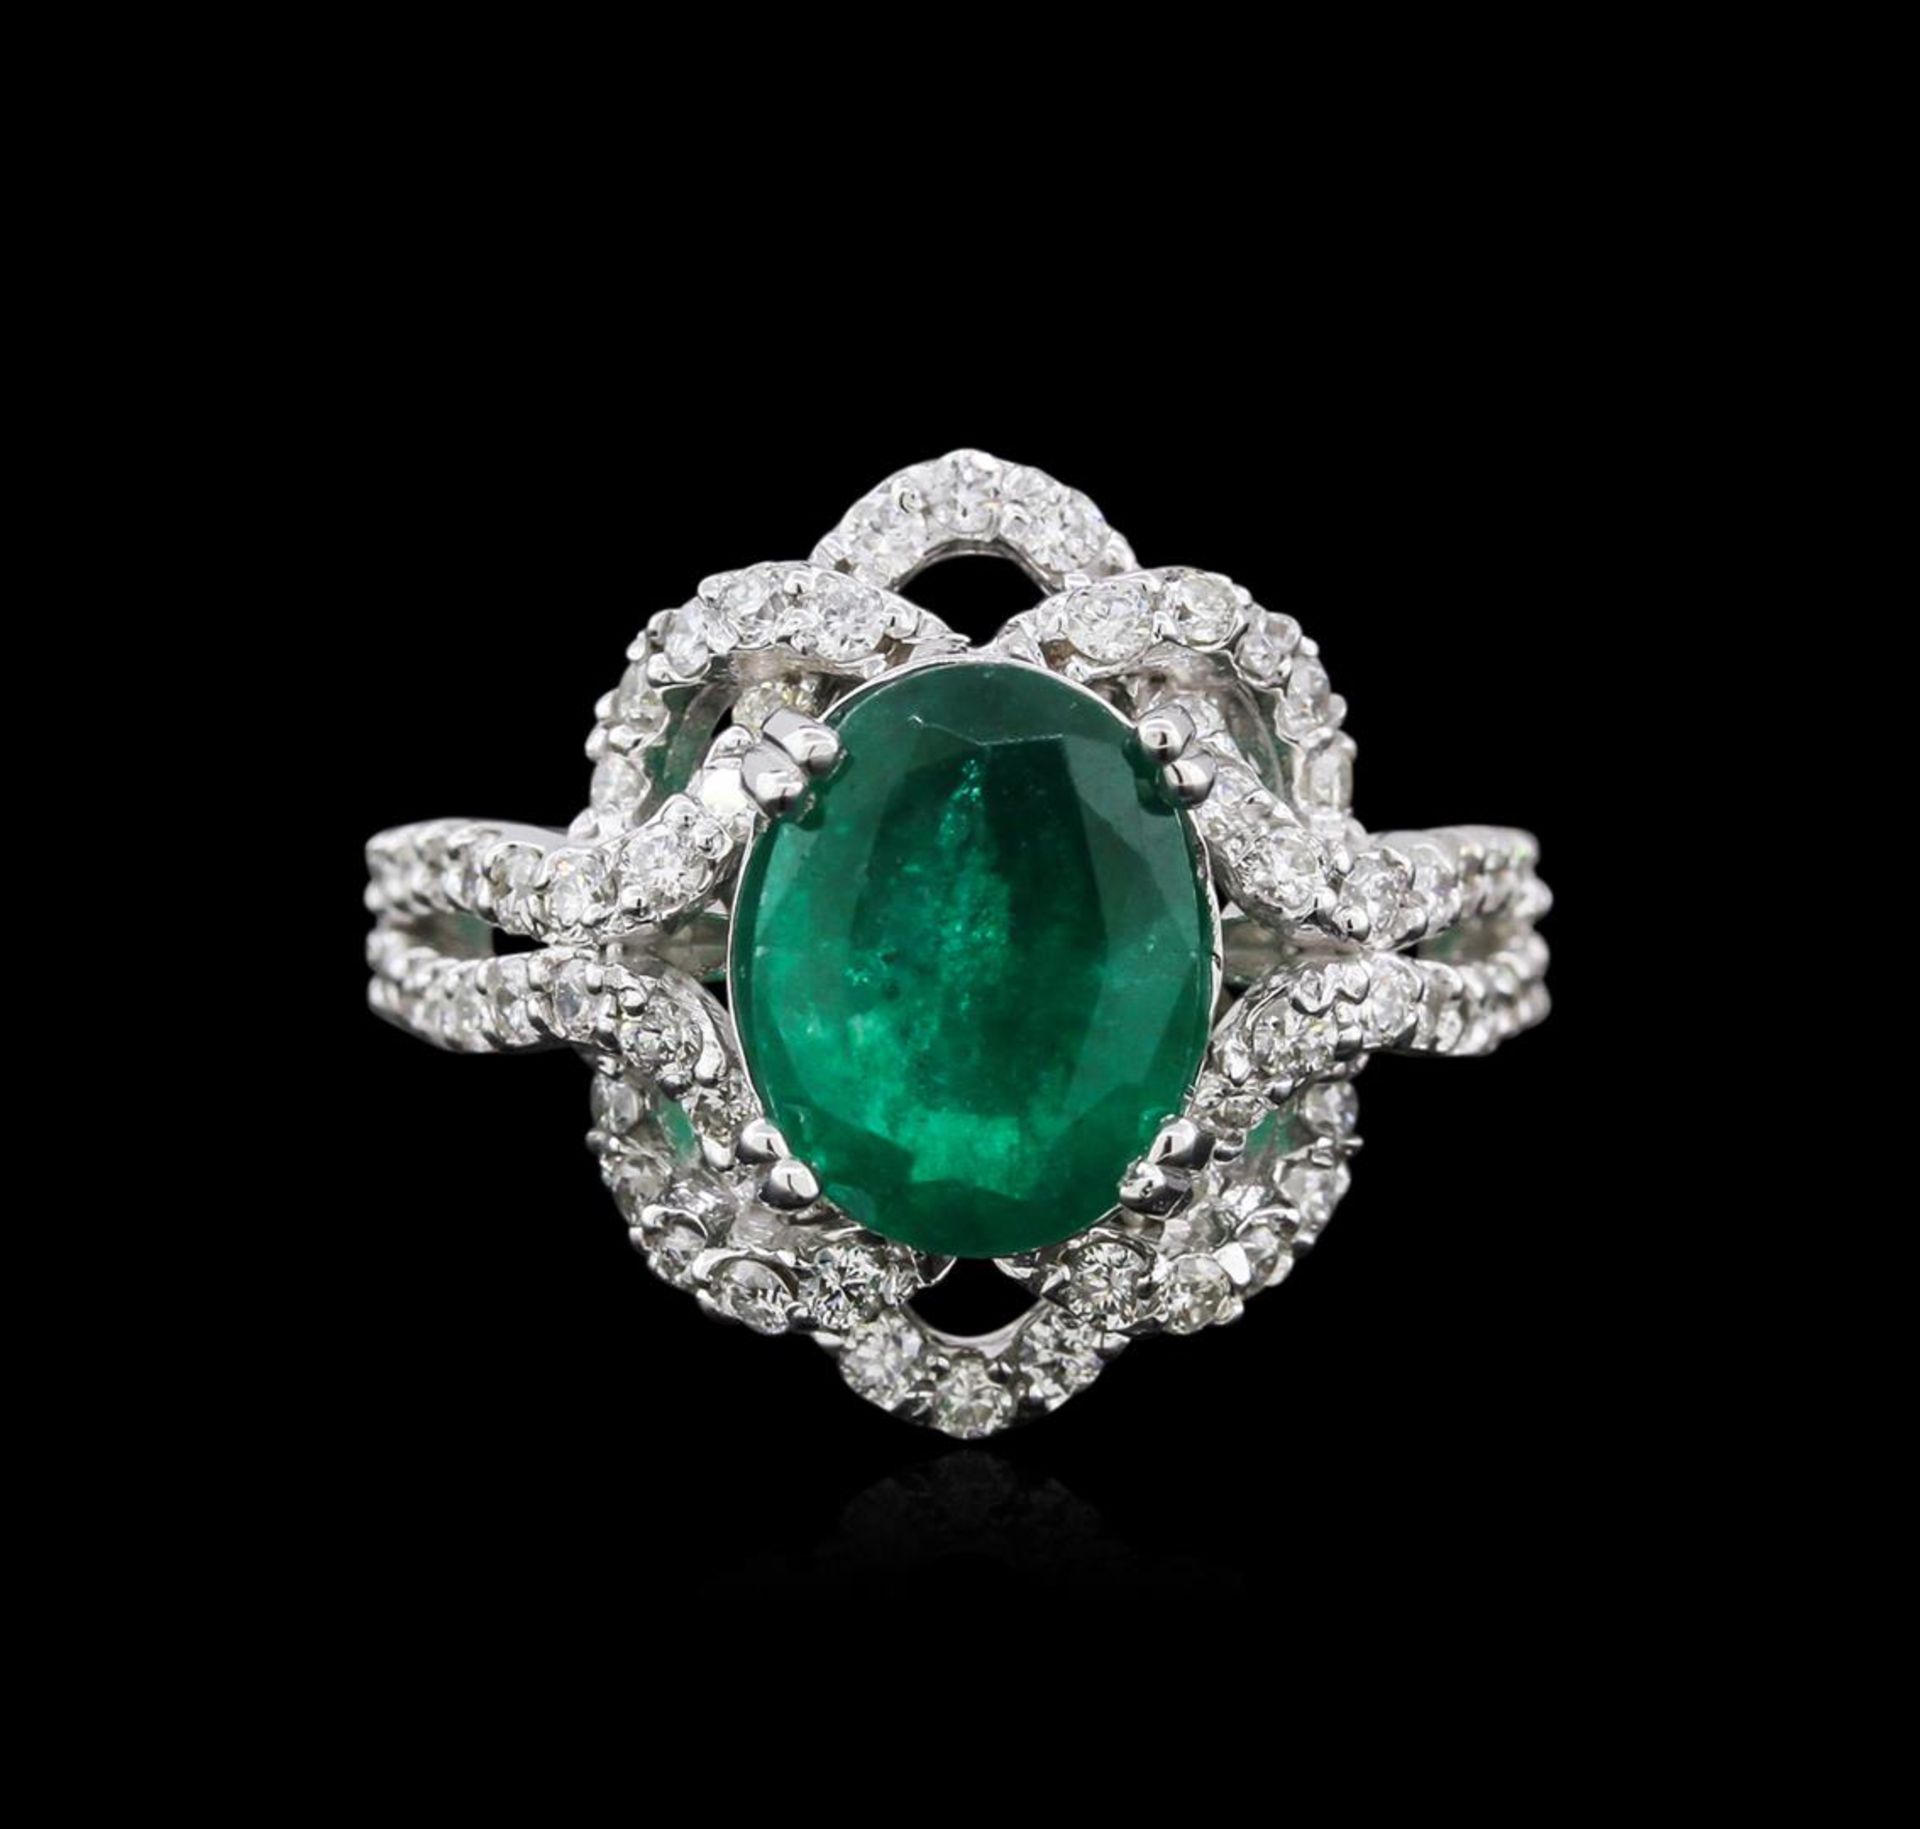 14KT White Gold 2.30 ctw Emerald and Diamond Ring - Image 2 of 4